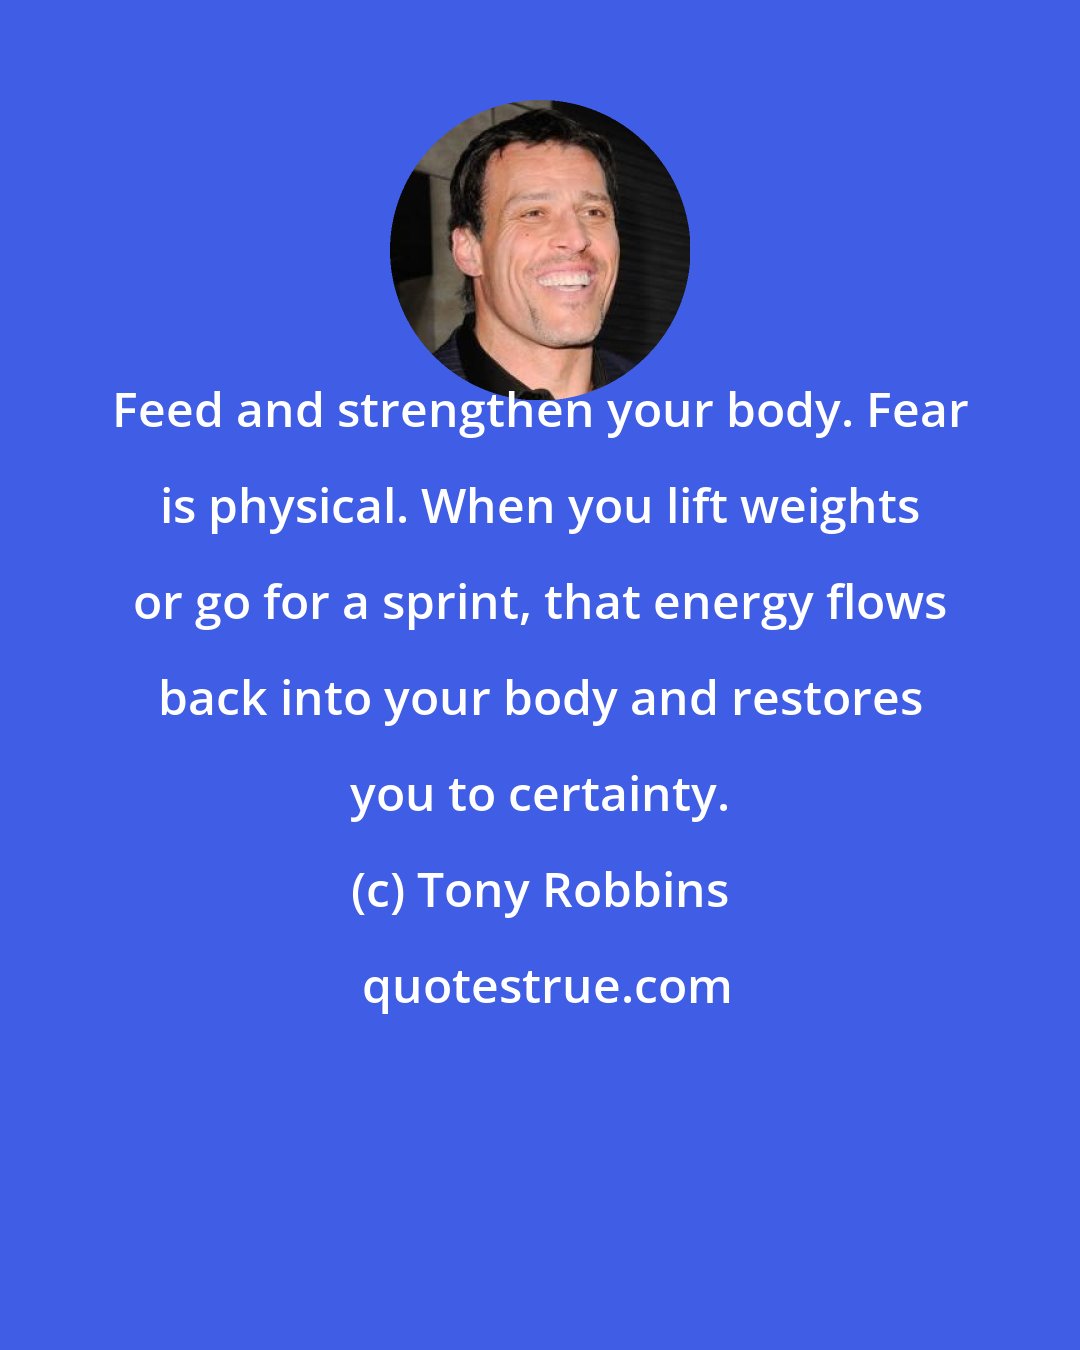 Tony Robbins: Feed and strengthen your body. Fear is physical. When you lift weights or go for a sprint, that energy flows back into your body and restores you to certainty.